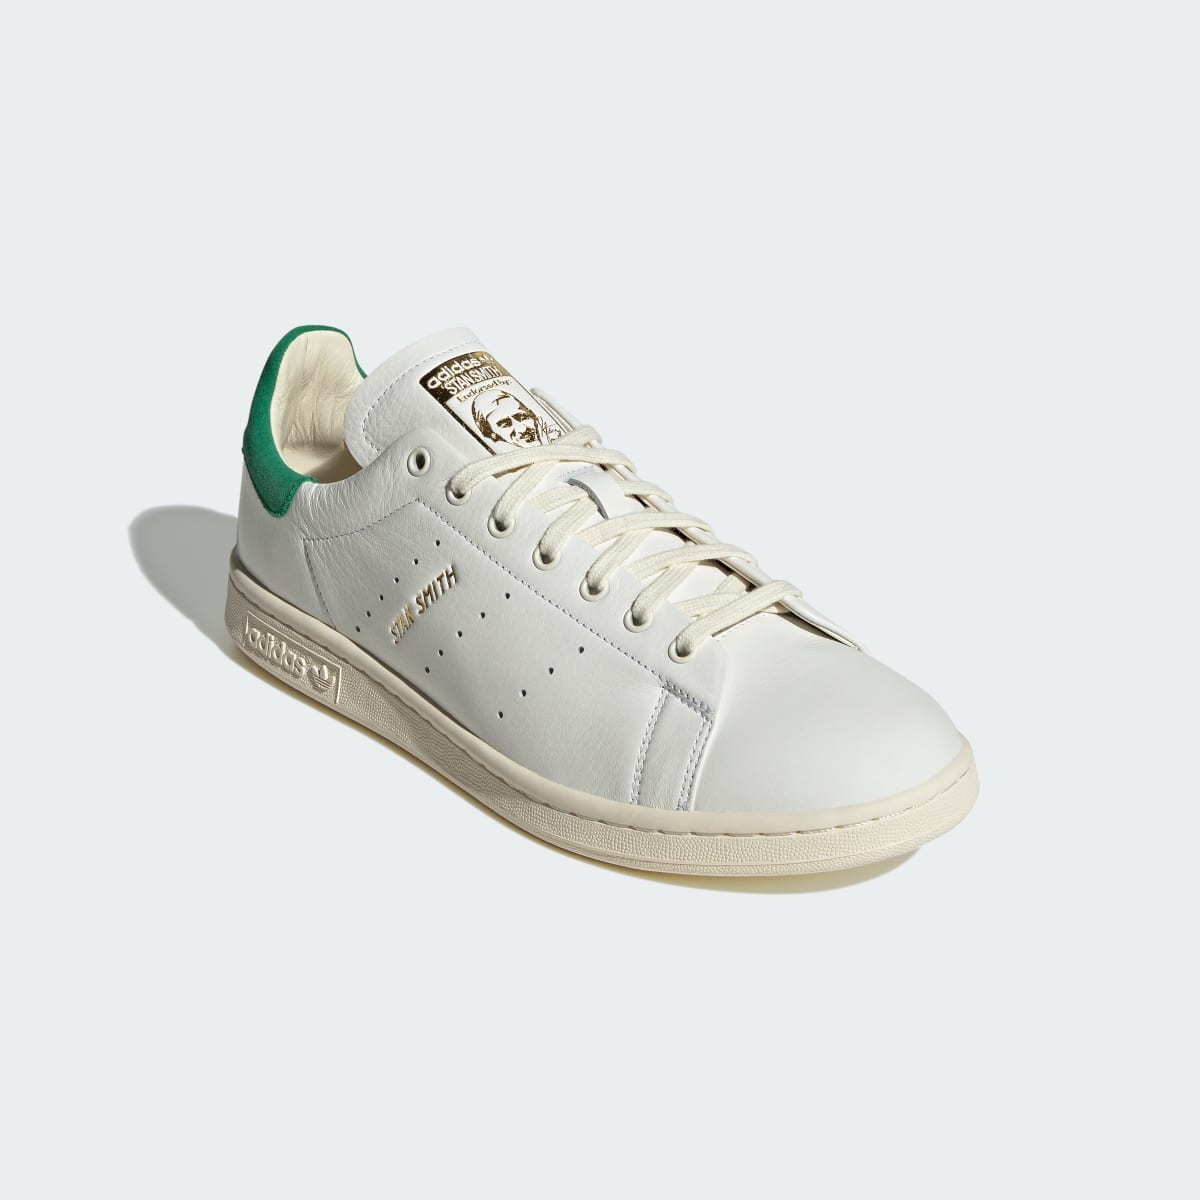 Adidas Chaussure Stan Smith Lux. 5